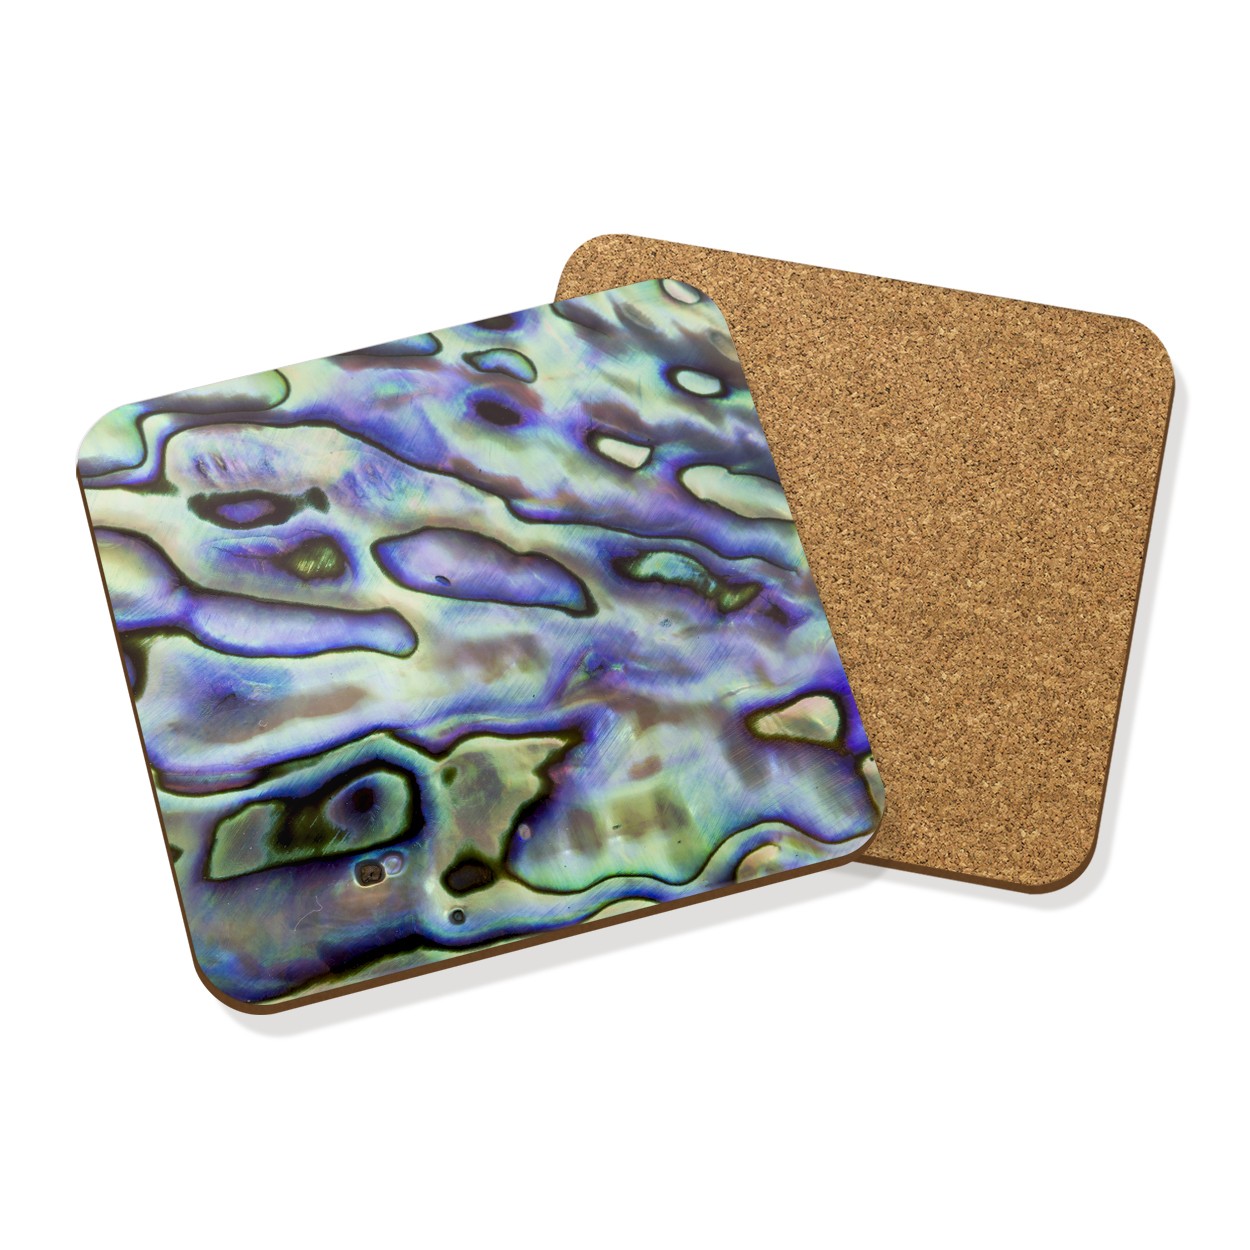 MOTHER OF PEARL EFFECT DRINKS COASTER MAT CORK SQUARE SET X4